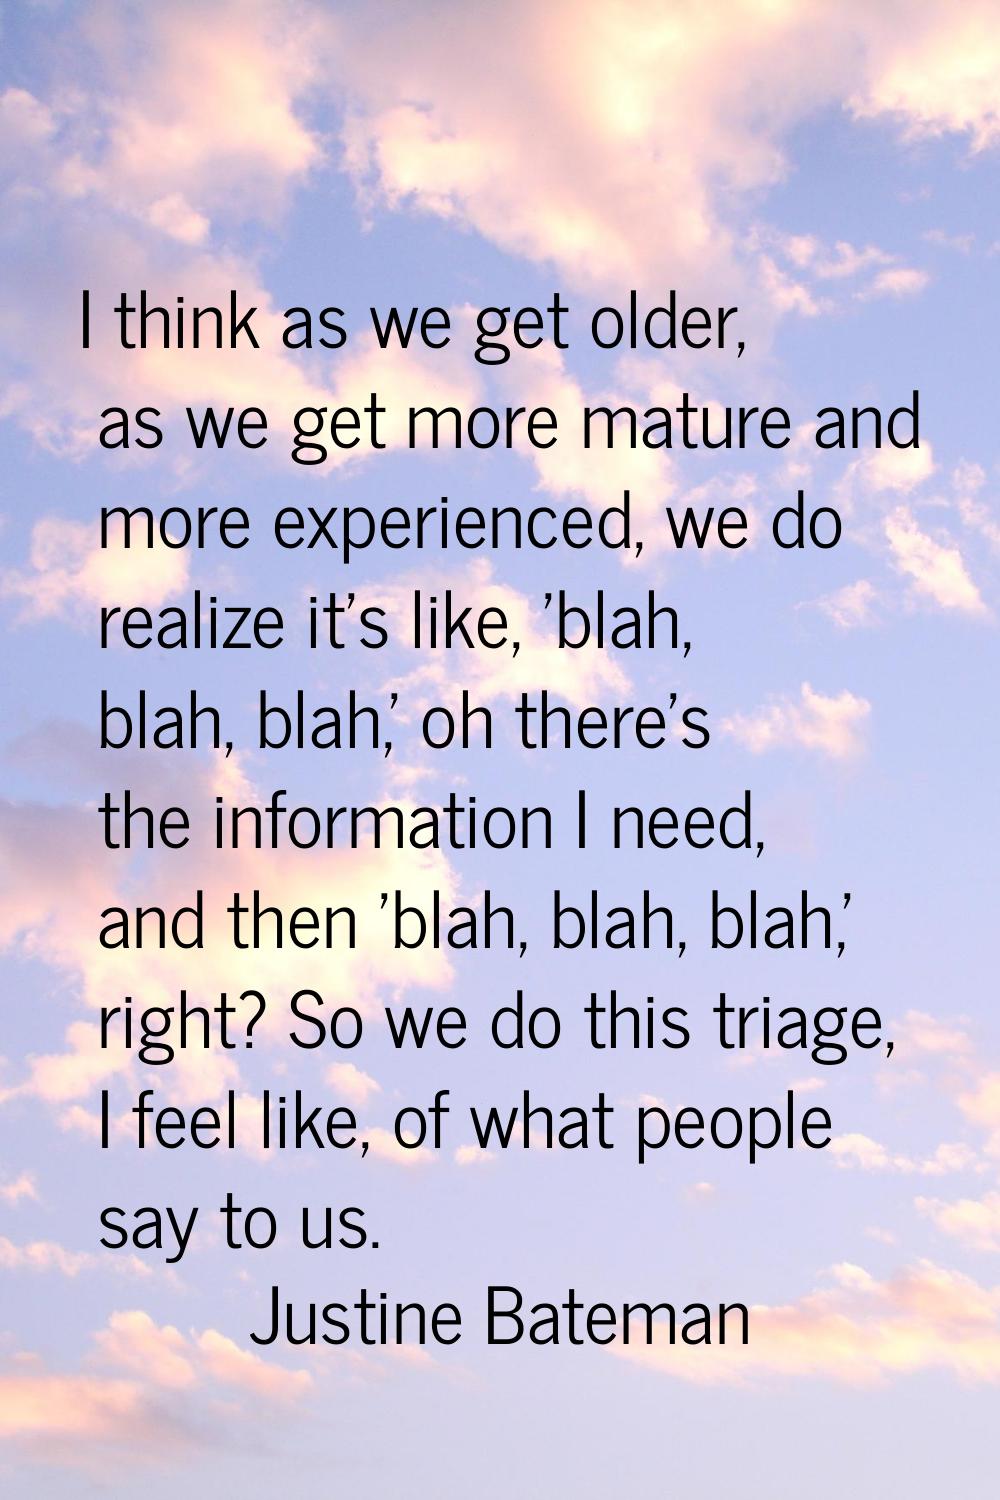 I think as we get older, as we get more mature and more experienced, we do realize it's like, 'blah